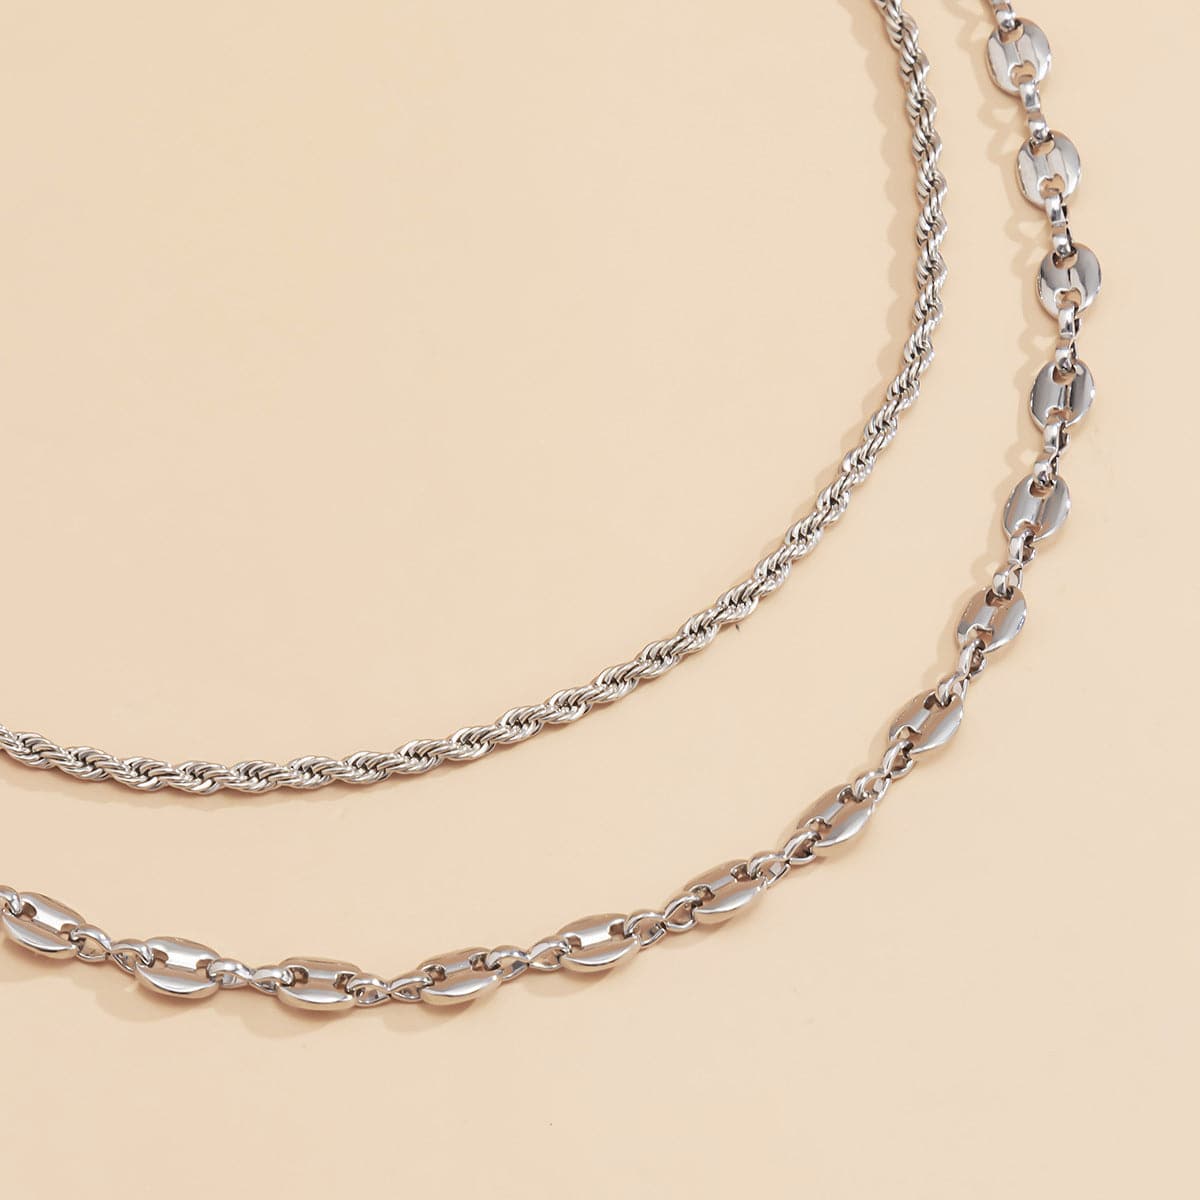 Silver-Plated Intertwined Layered Necklace